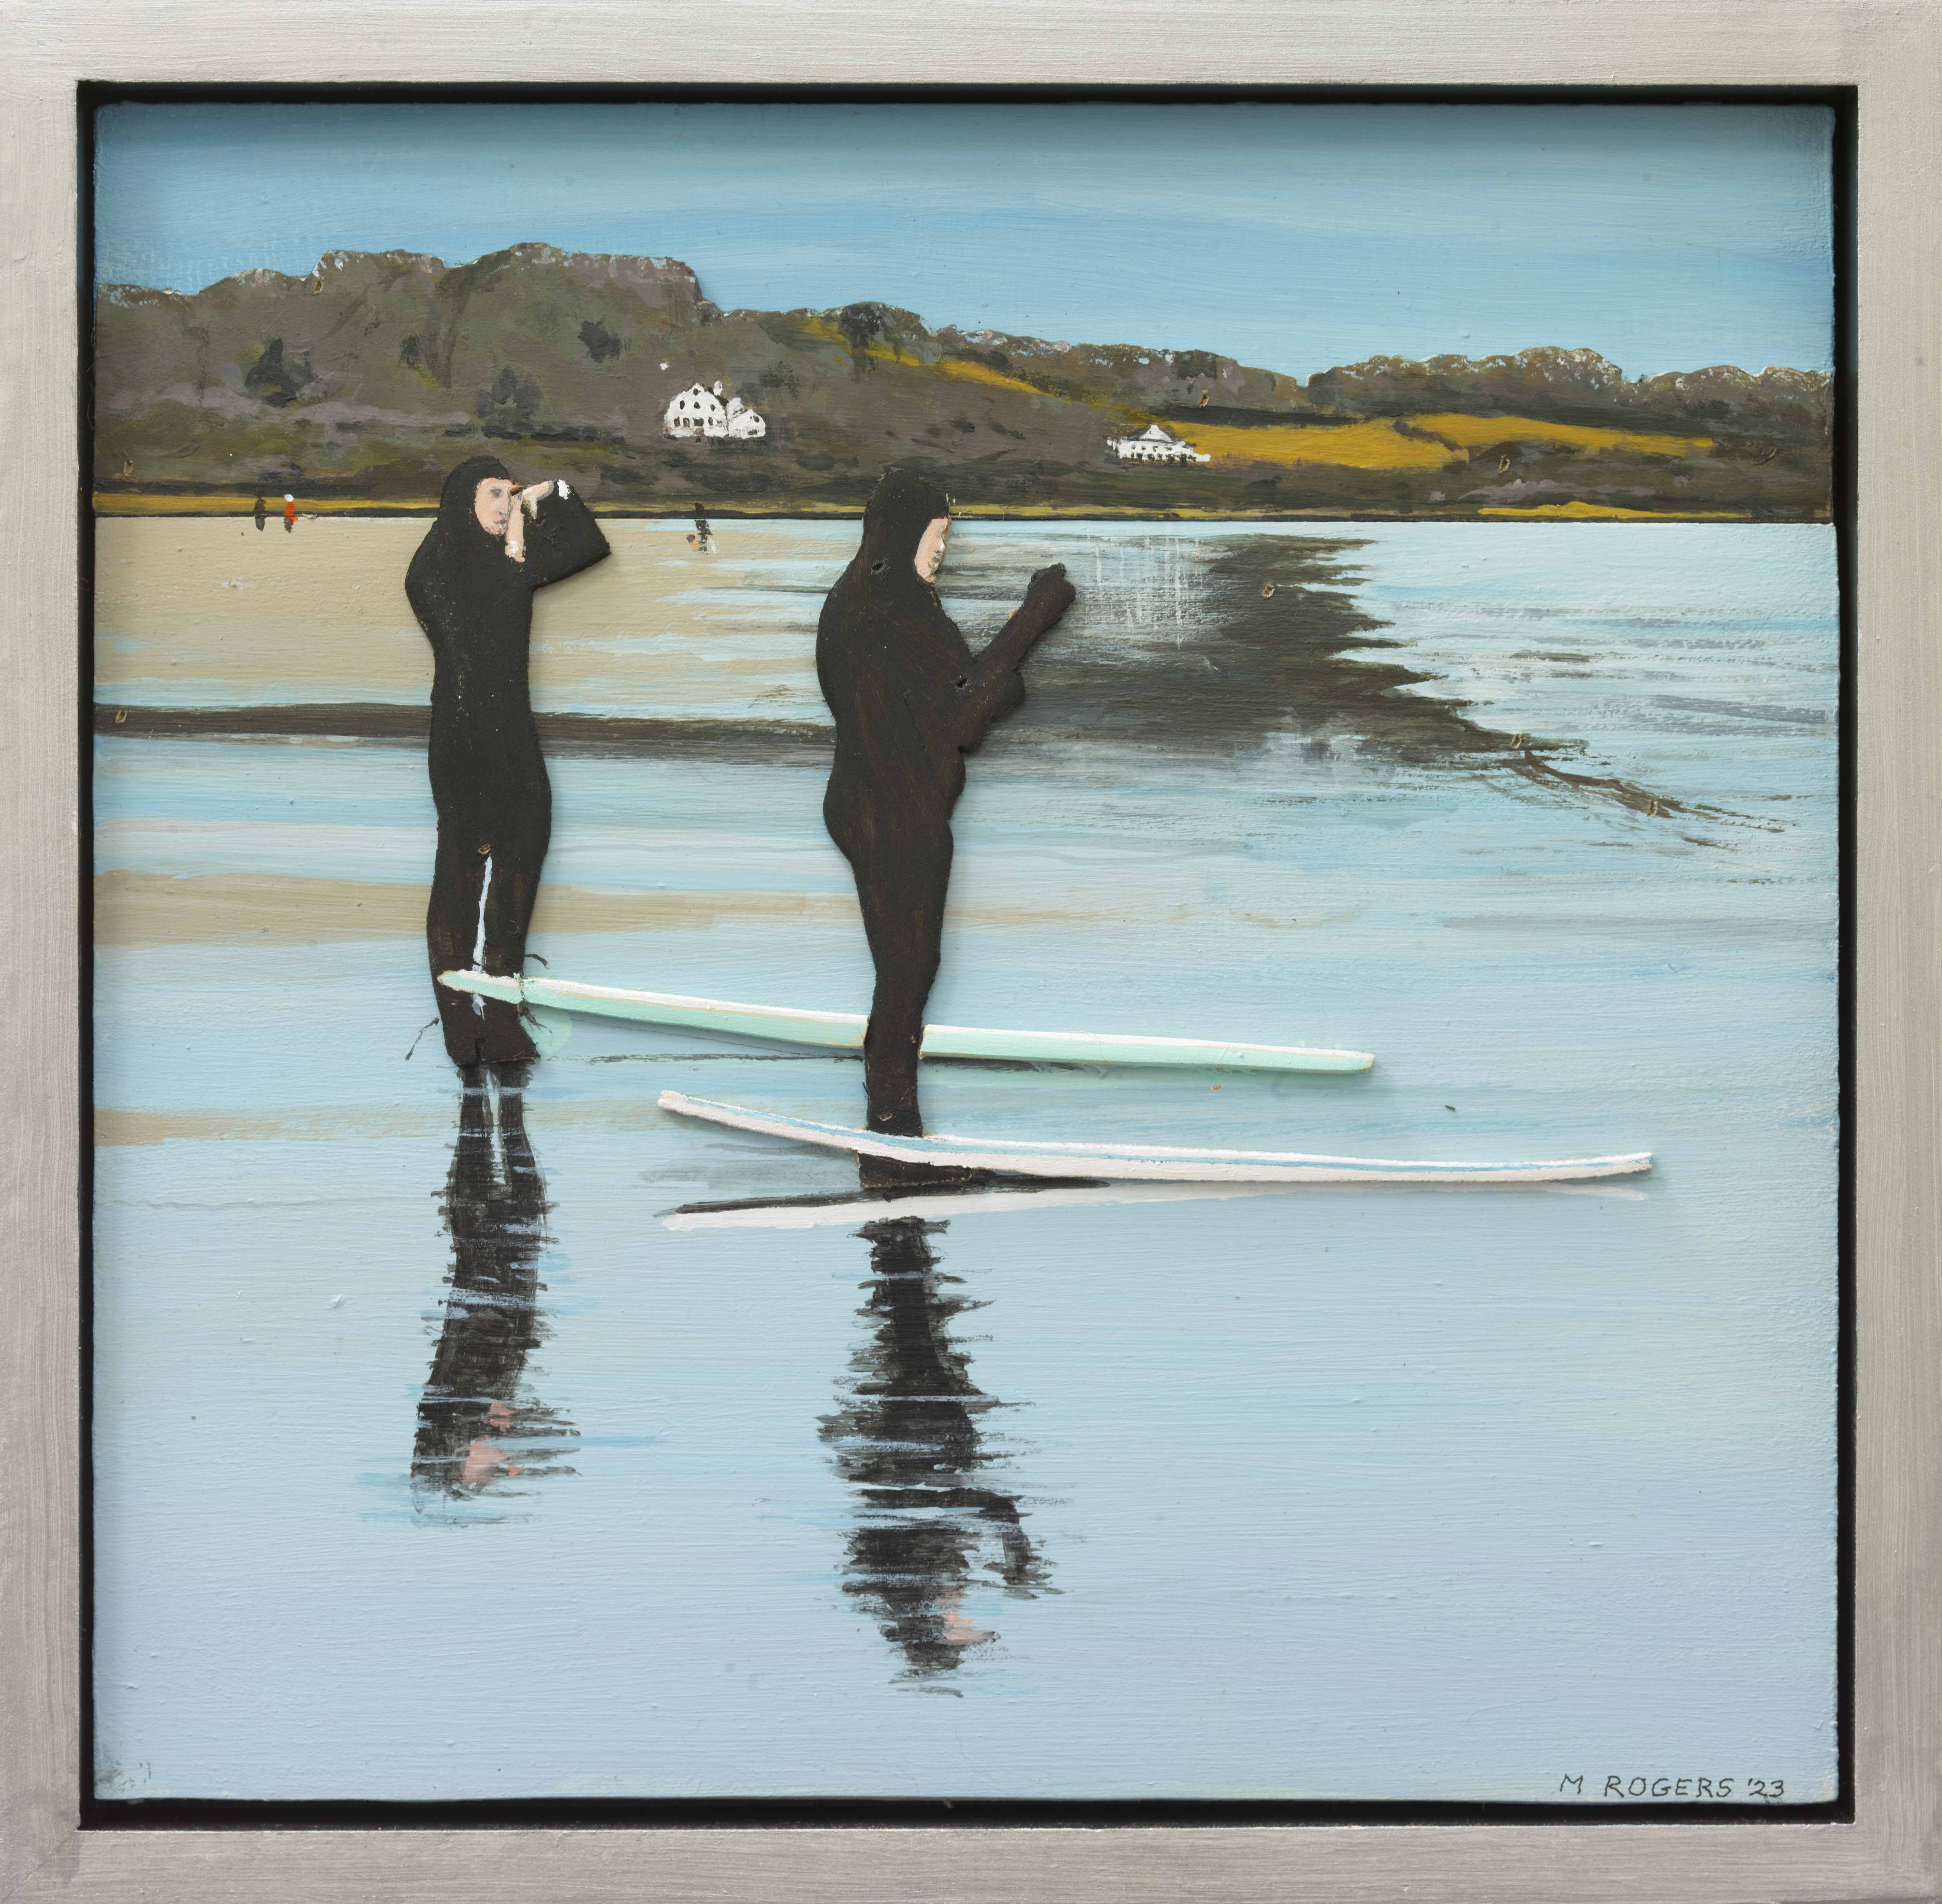 Surfers in Wetsuits, 2023, mixed media, 14 x 14 inches